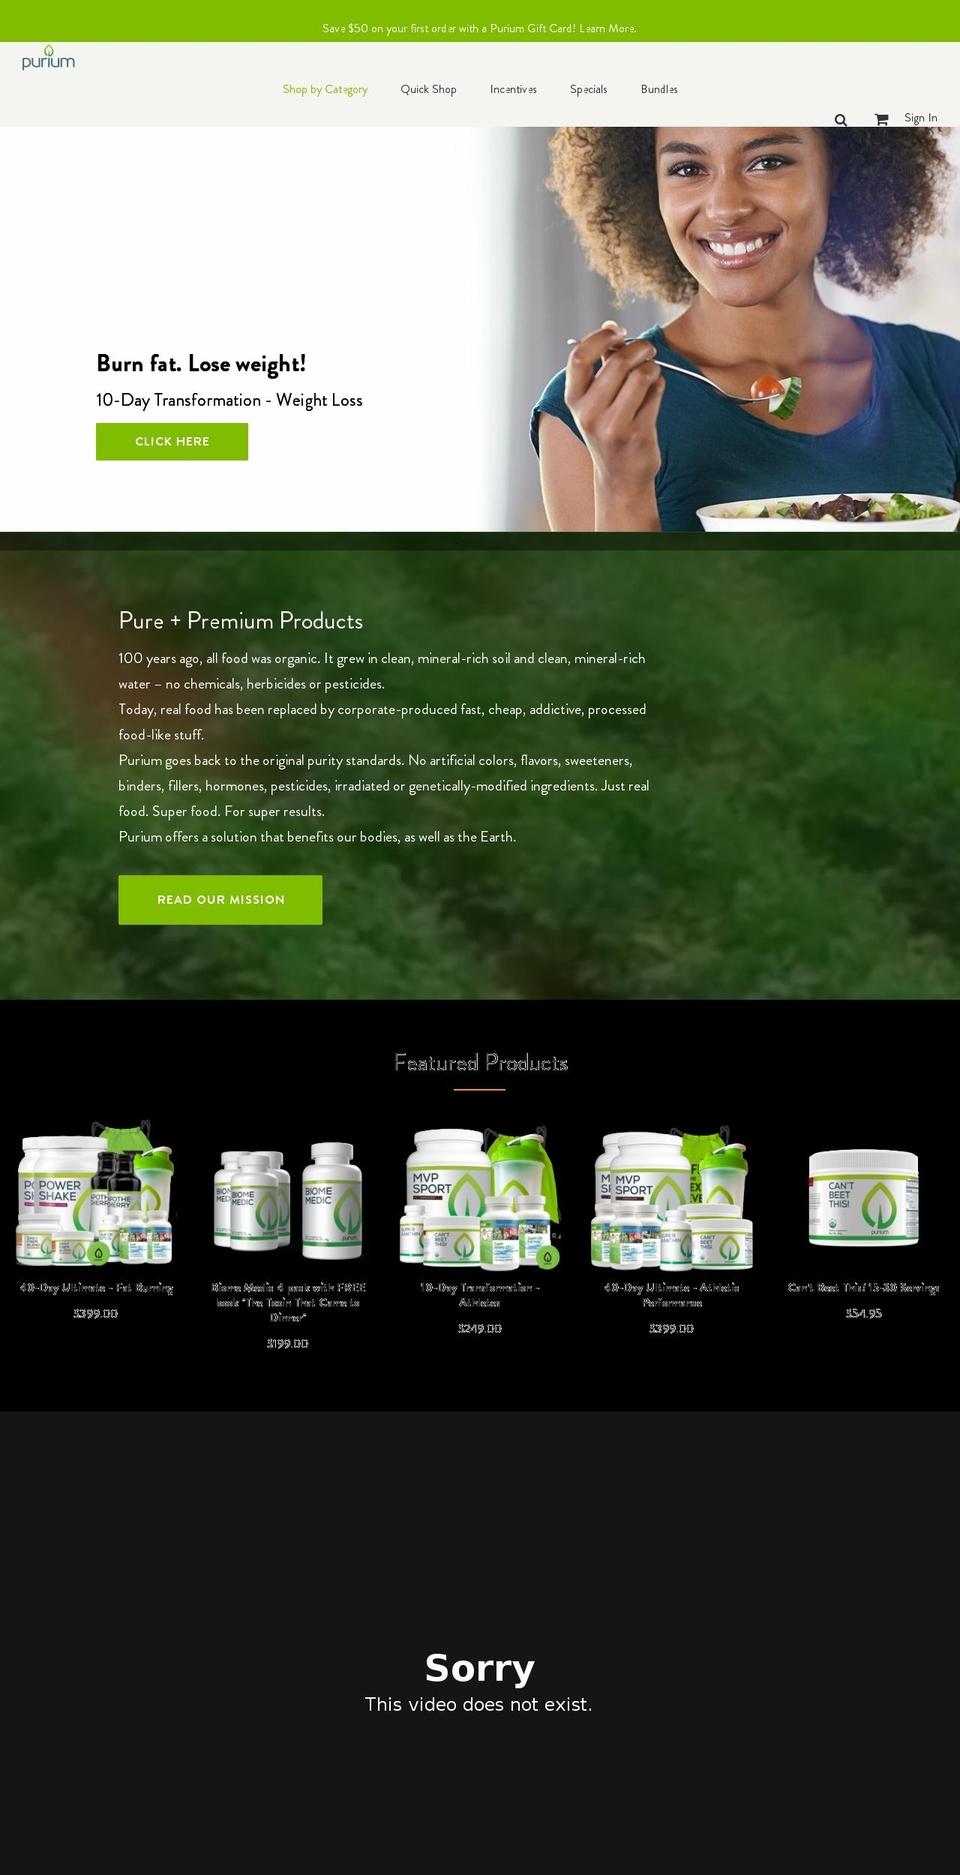 Production | BVA Shopify theme site example drinkgreenbehealthy.com